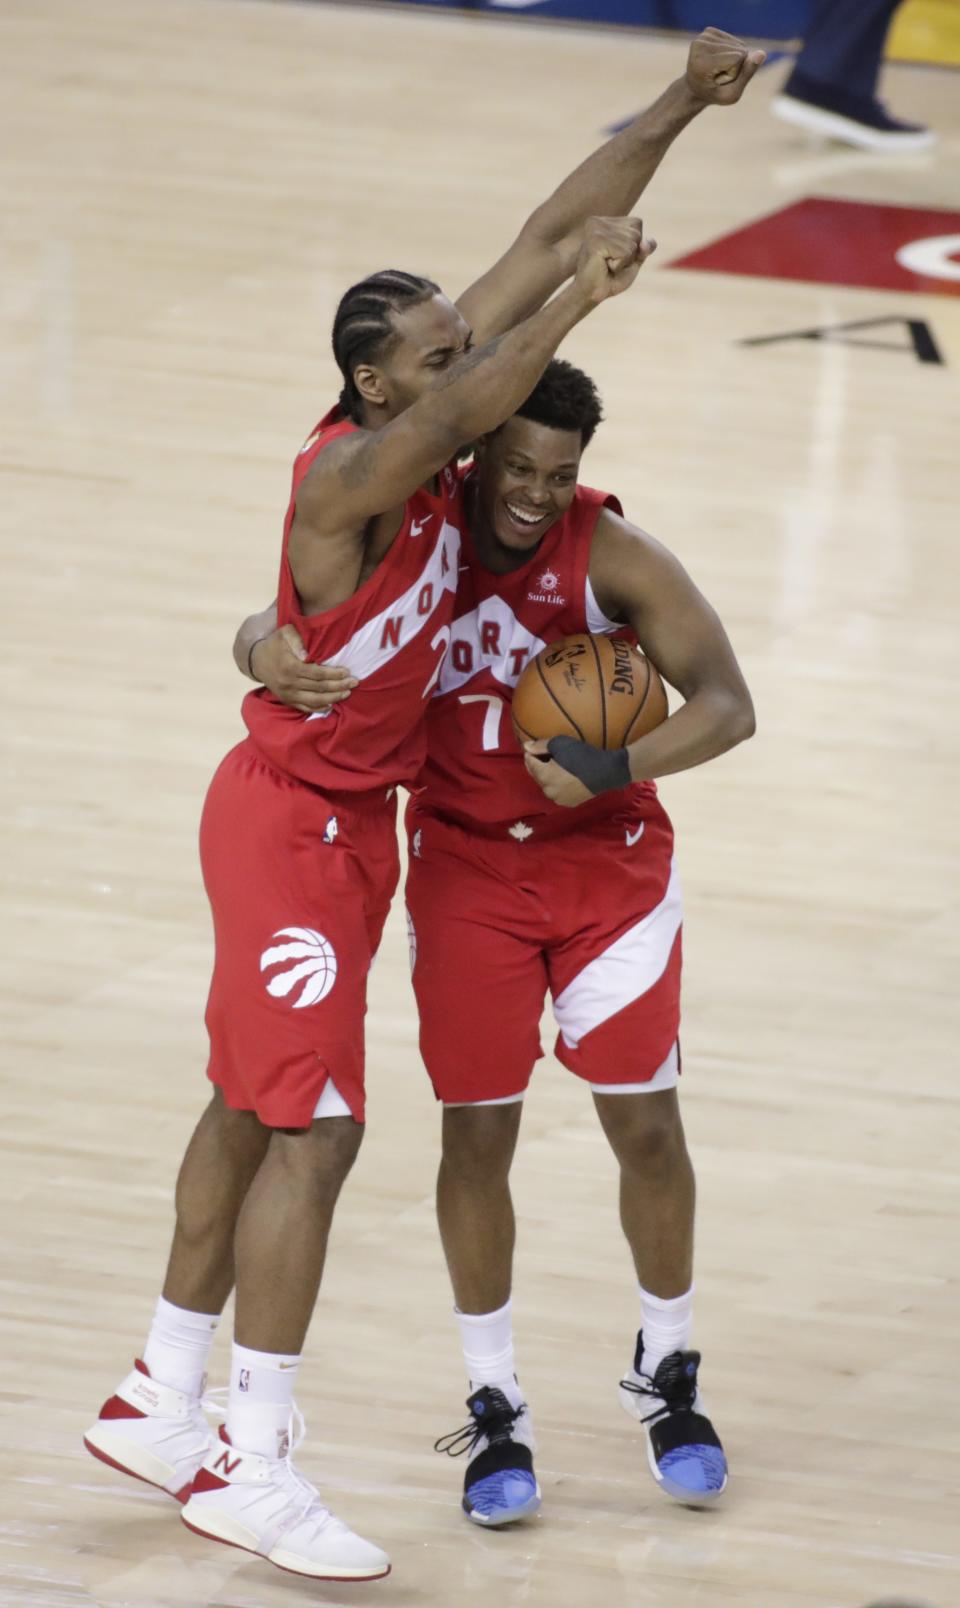 Toronto Raptors forward Kawhi Leonard #2 celebrates with teammate Kyle Lowry #7 at the conclusion of the NBA Finals Championships Game 6 between the Toronto Raptors at Golden State Warriors at Oracle Arena in Oakland, California. (Photo by EPA/MONICA M DAVEY)